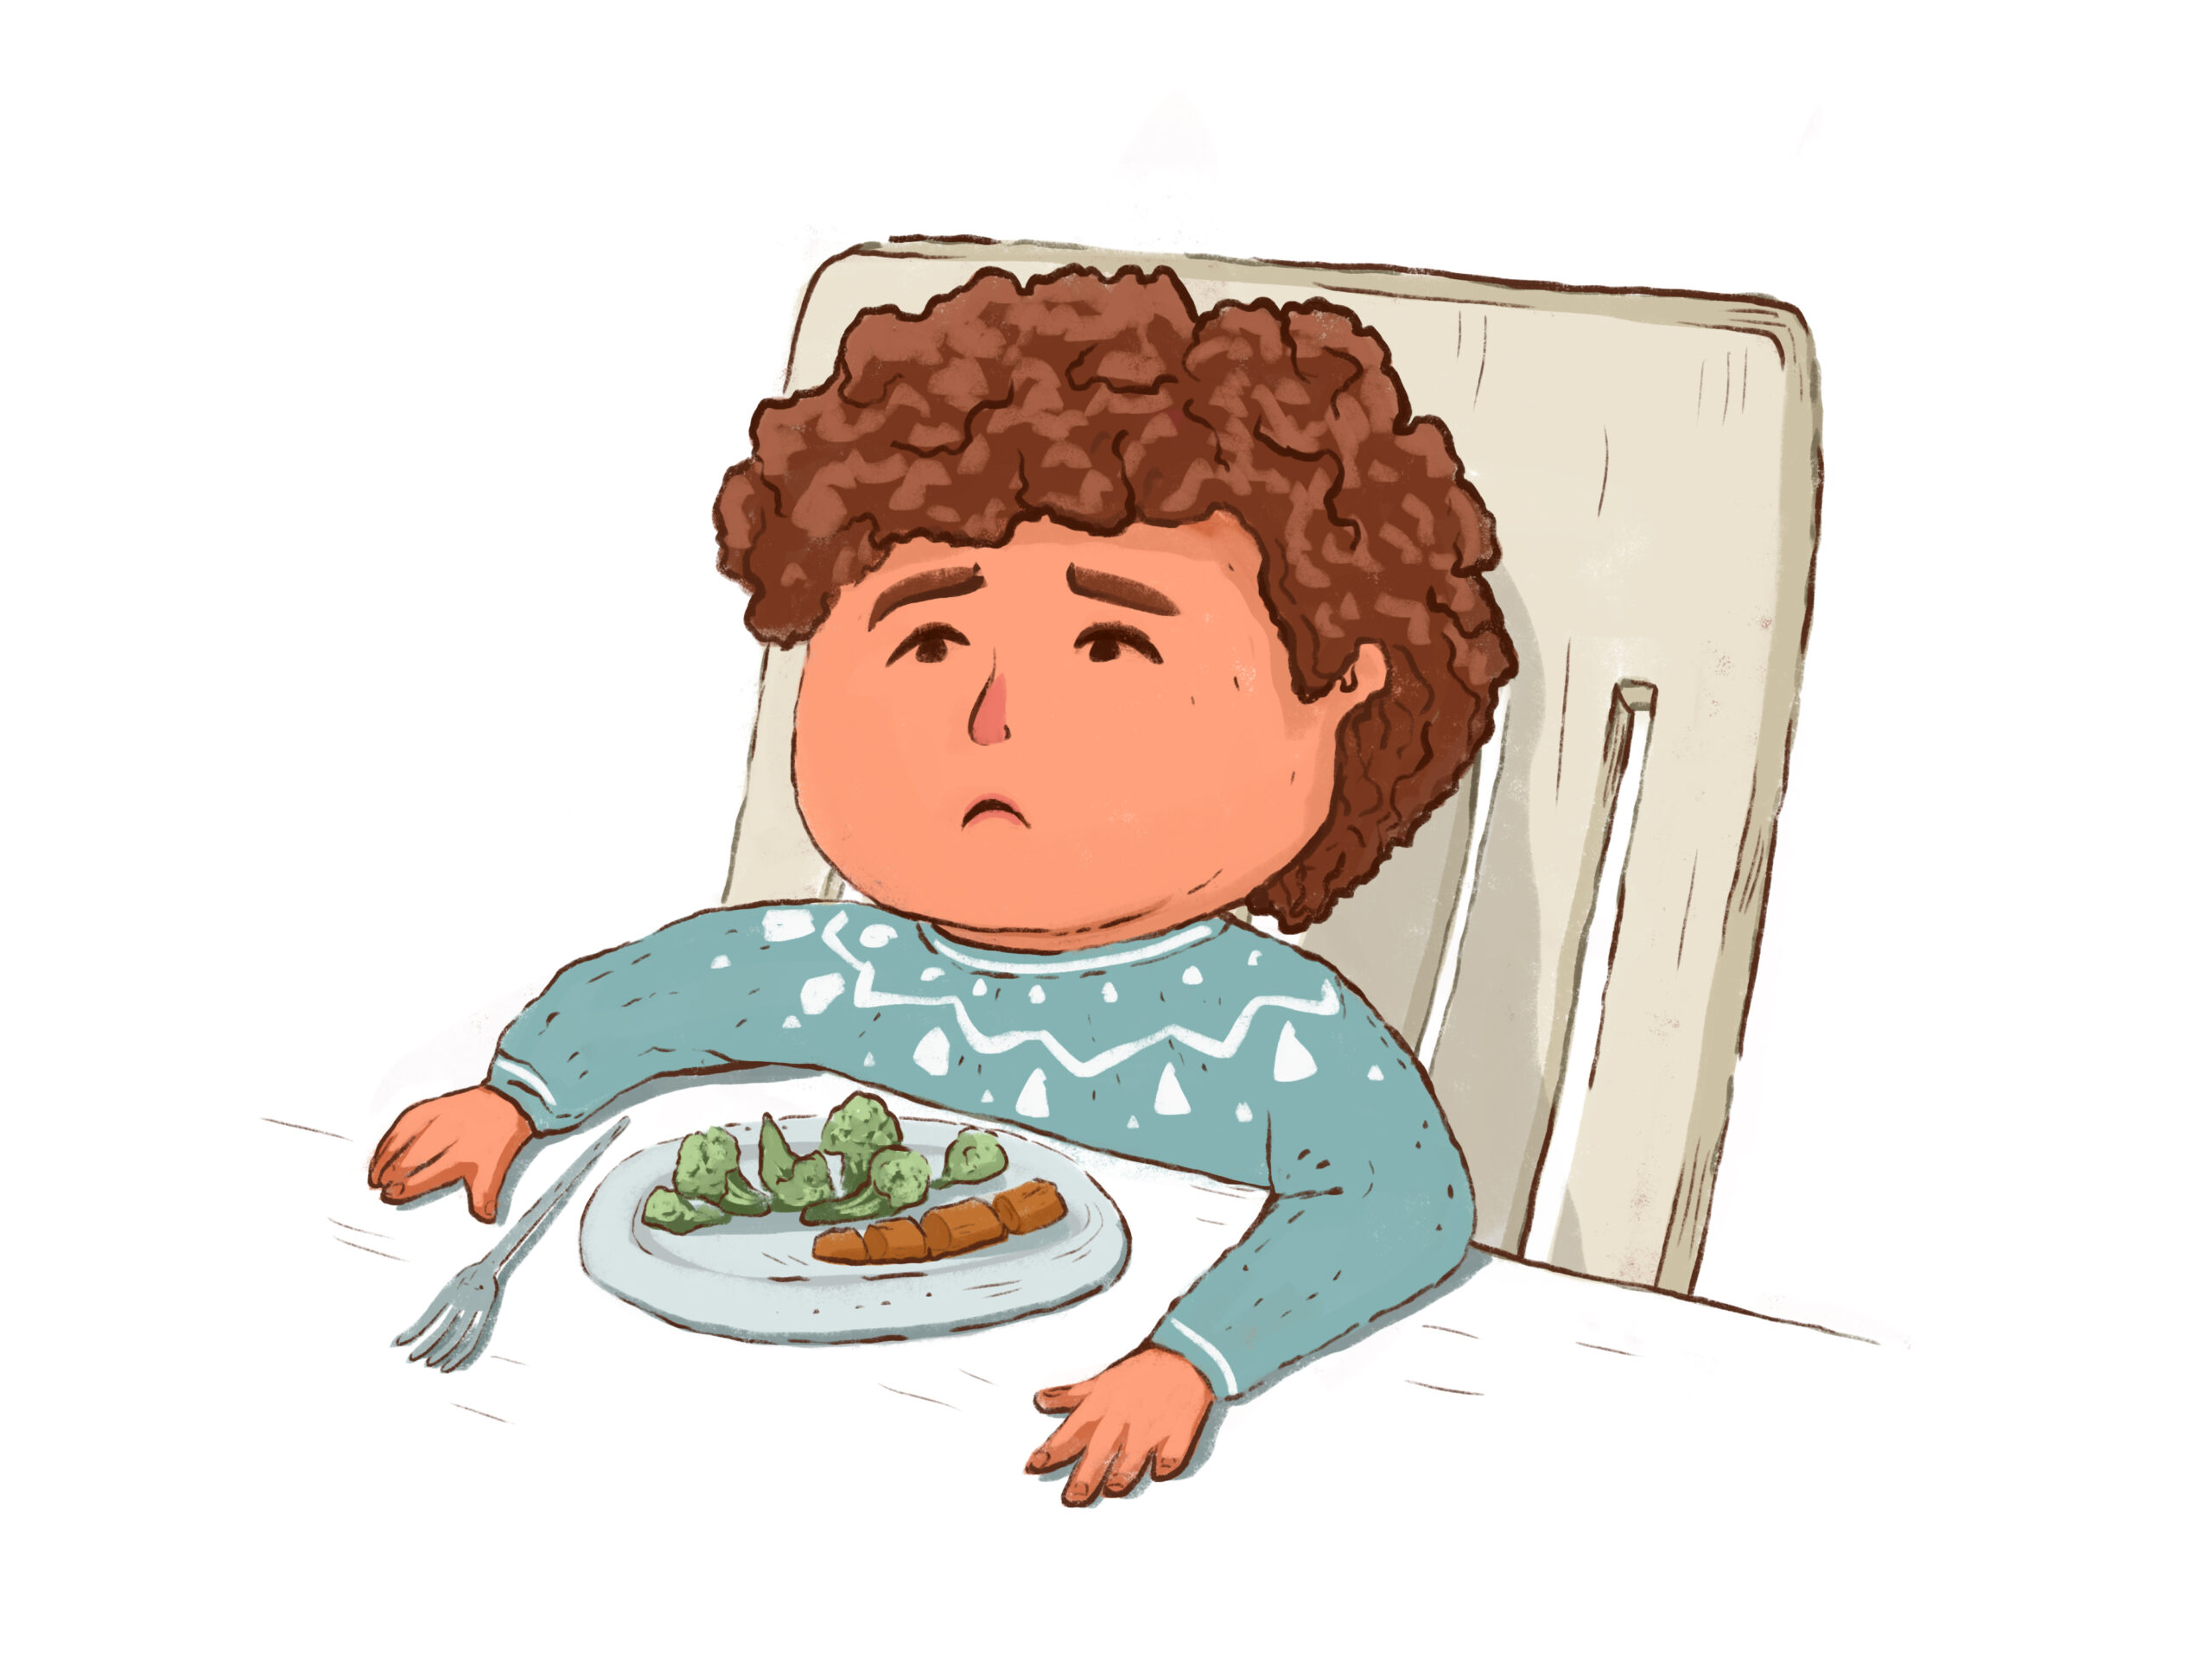 illustration of a disgruntled child sitting at a table with a plate of broccoli and carrots. Picky eater not eating healthy dinner